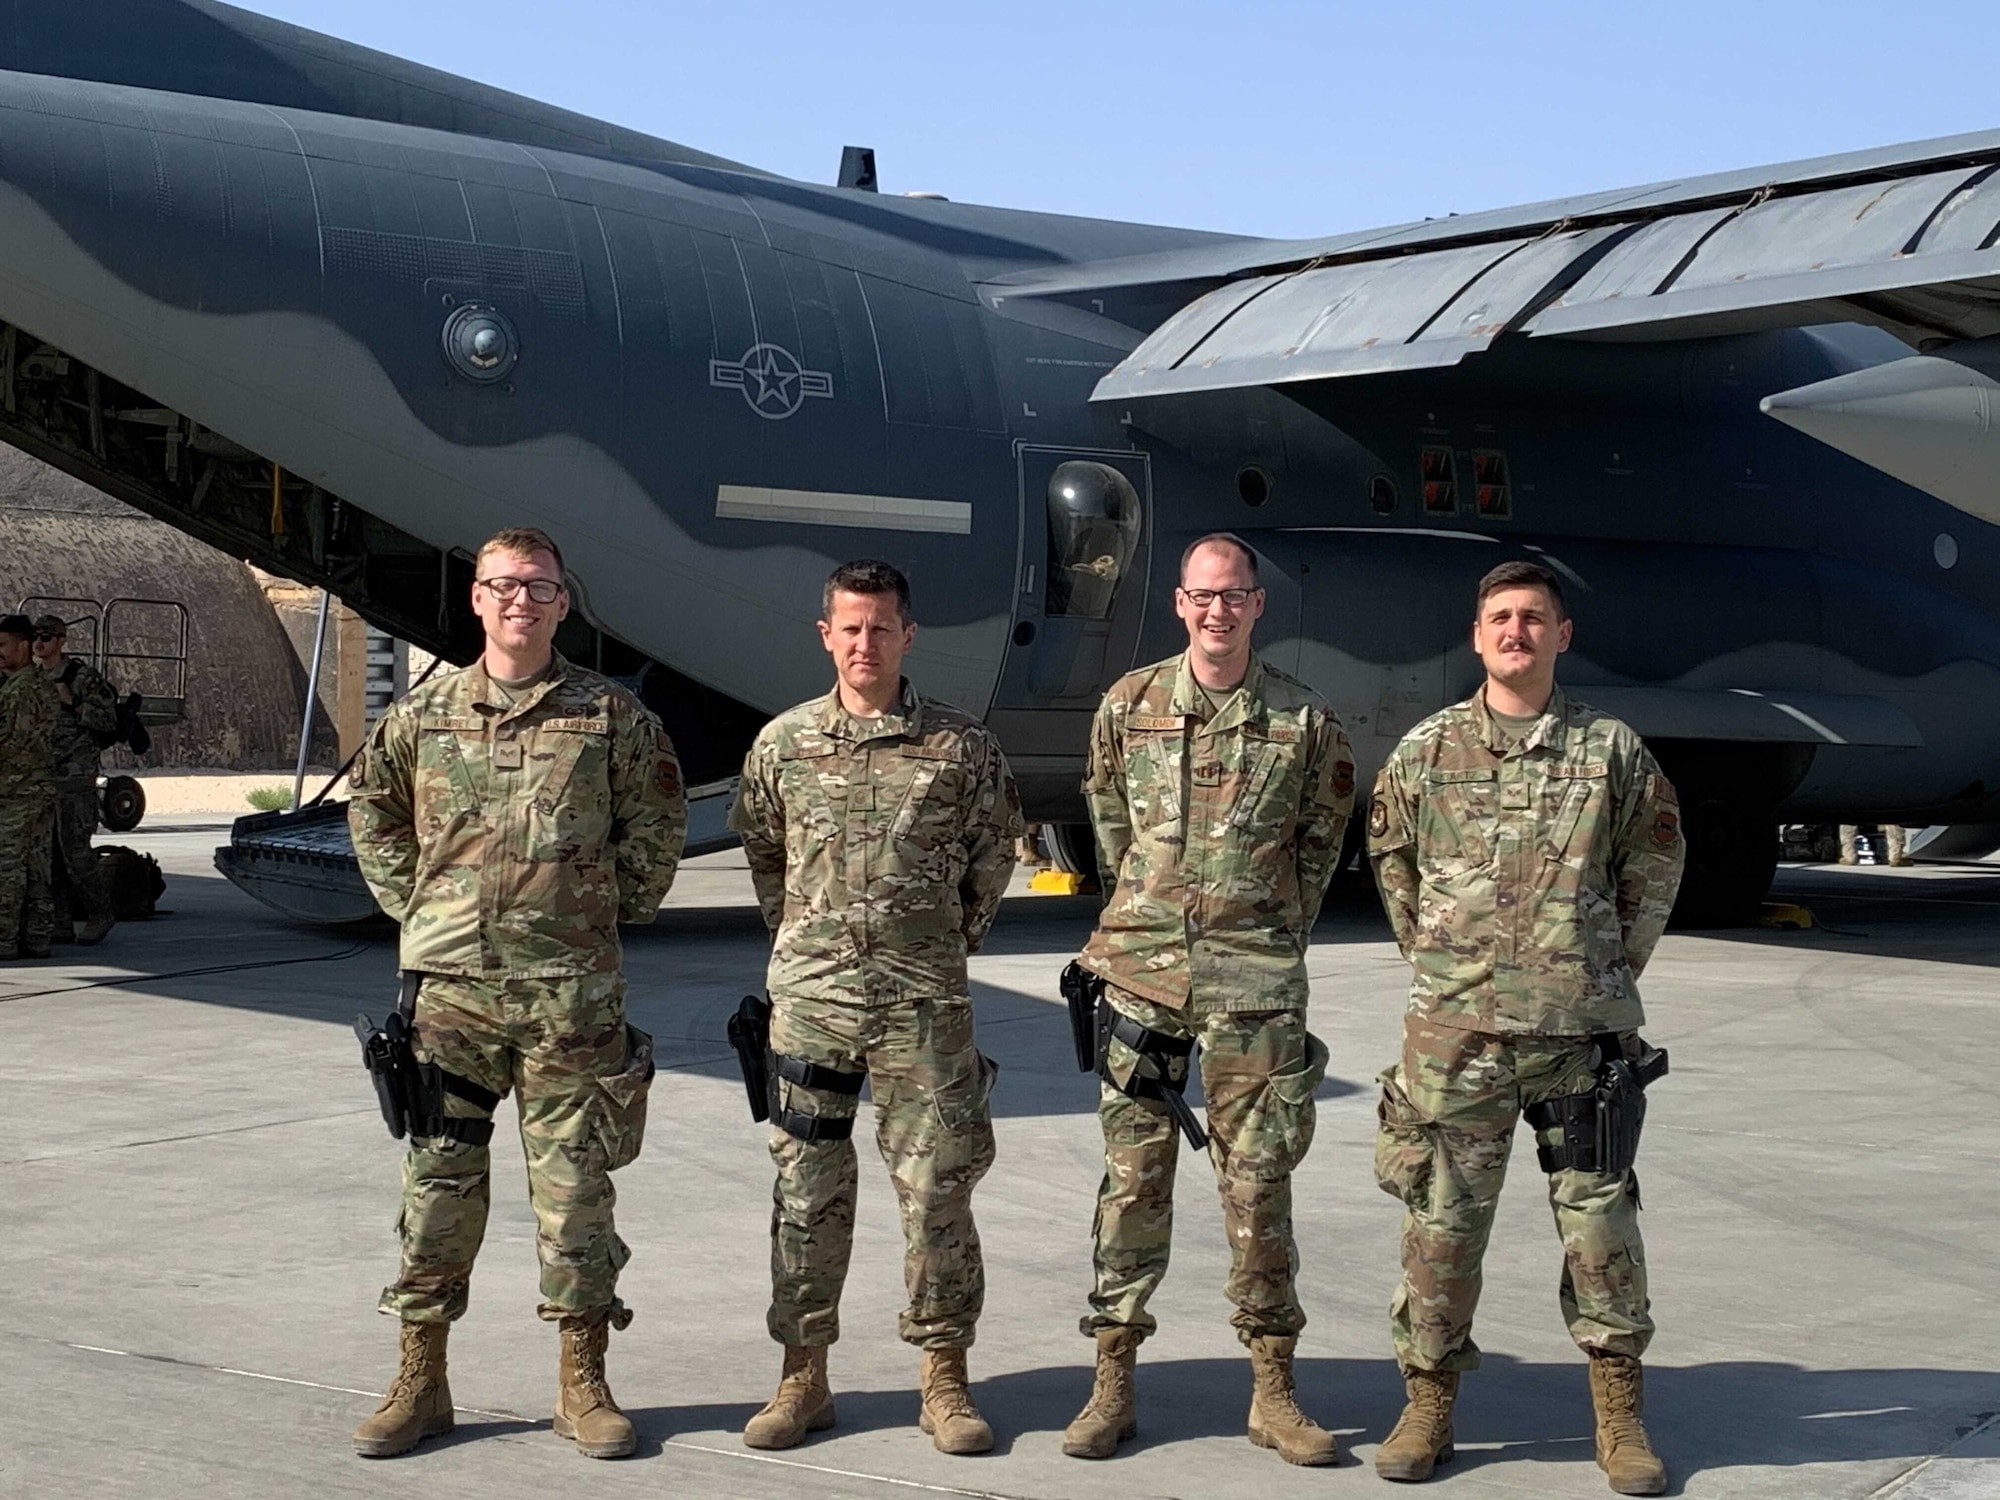 Airmen assigned to the 332nd Expeditionary Operations Support Squadron pose for a group photo September 2021, at an undisclosed location in the United States Central Command area of responsibility.